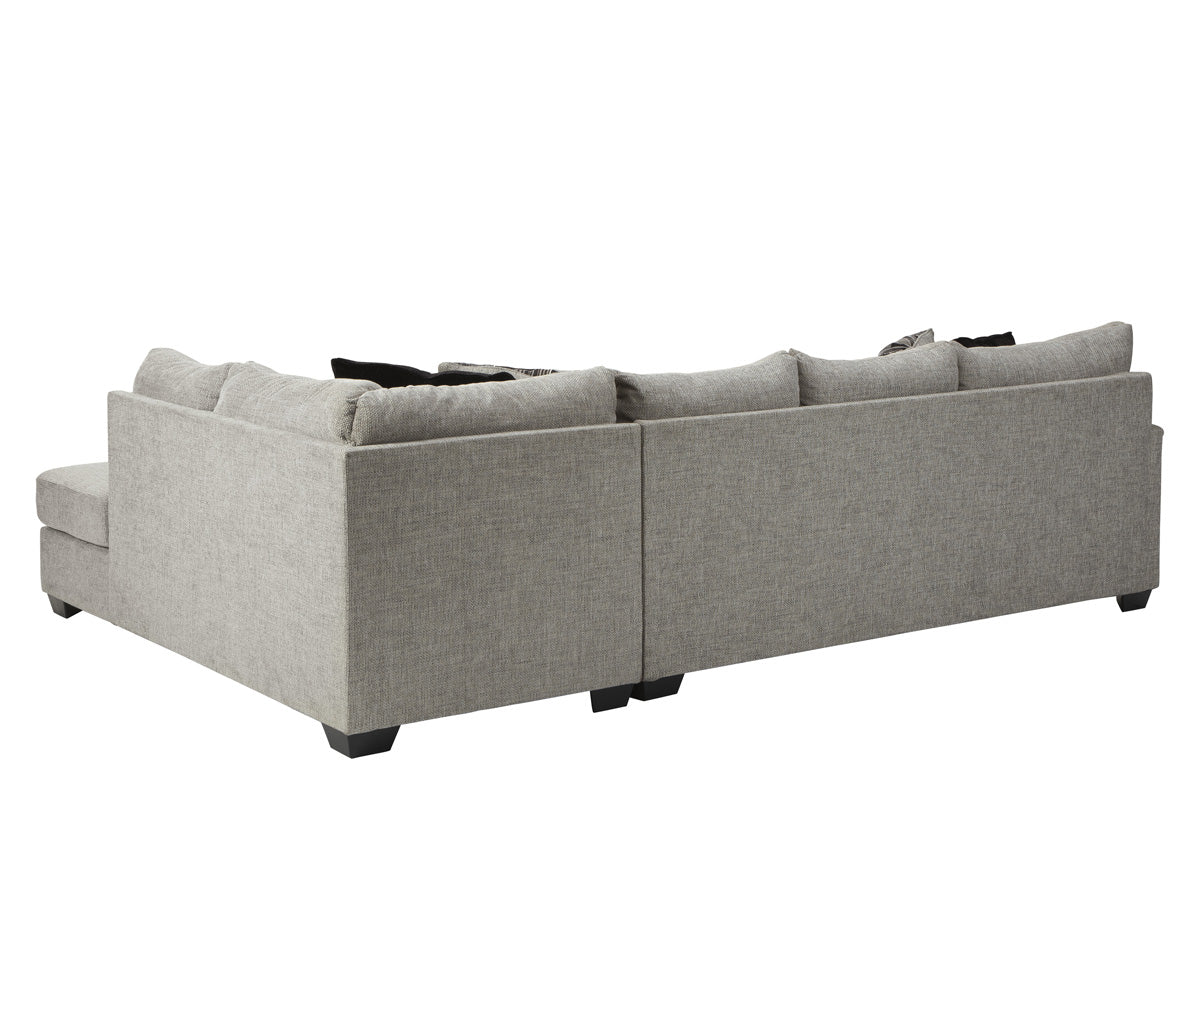 Storm 2 Piece Sectional - Grey Fabric